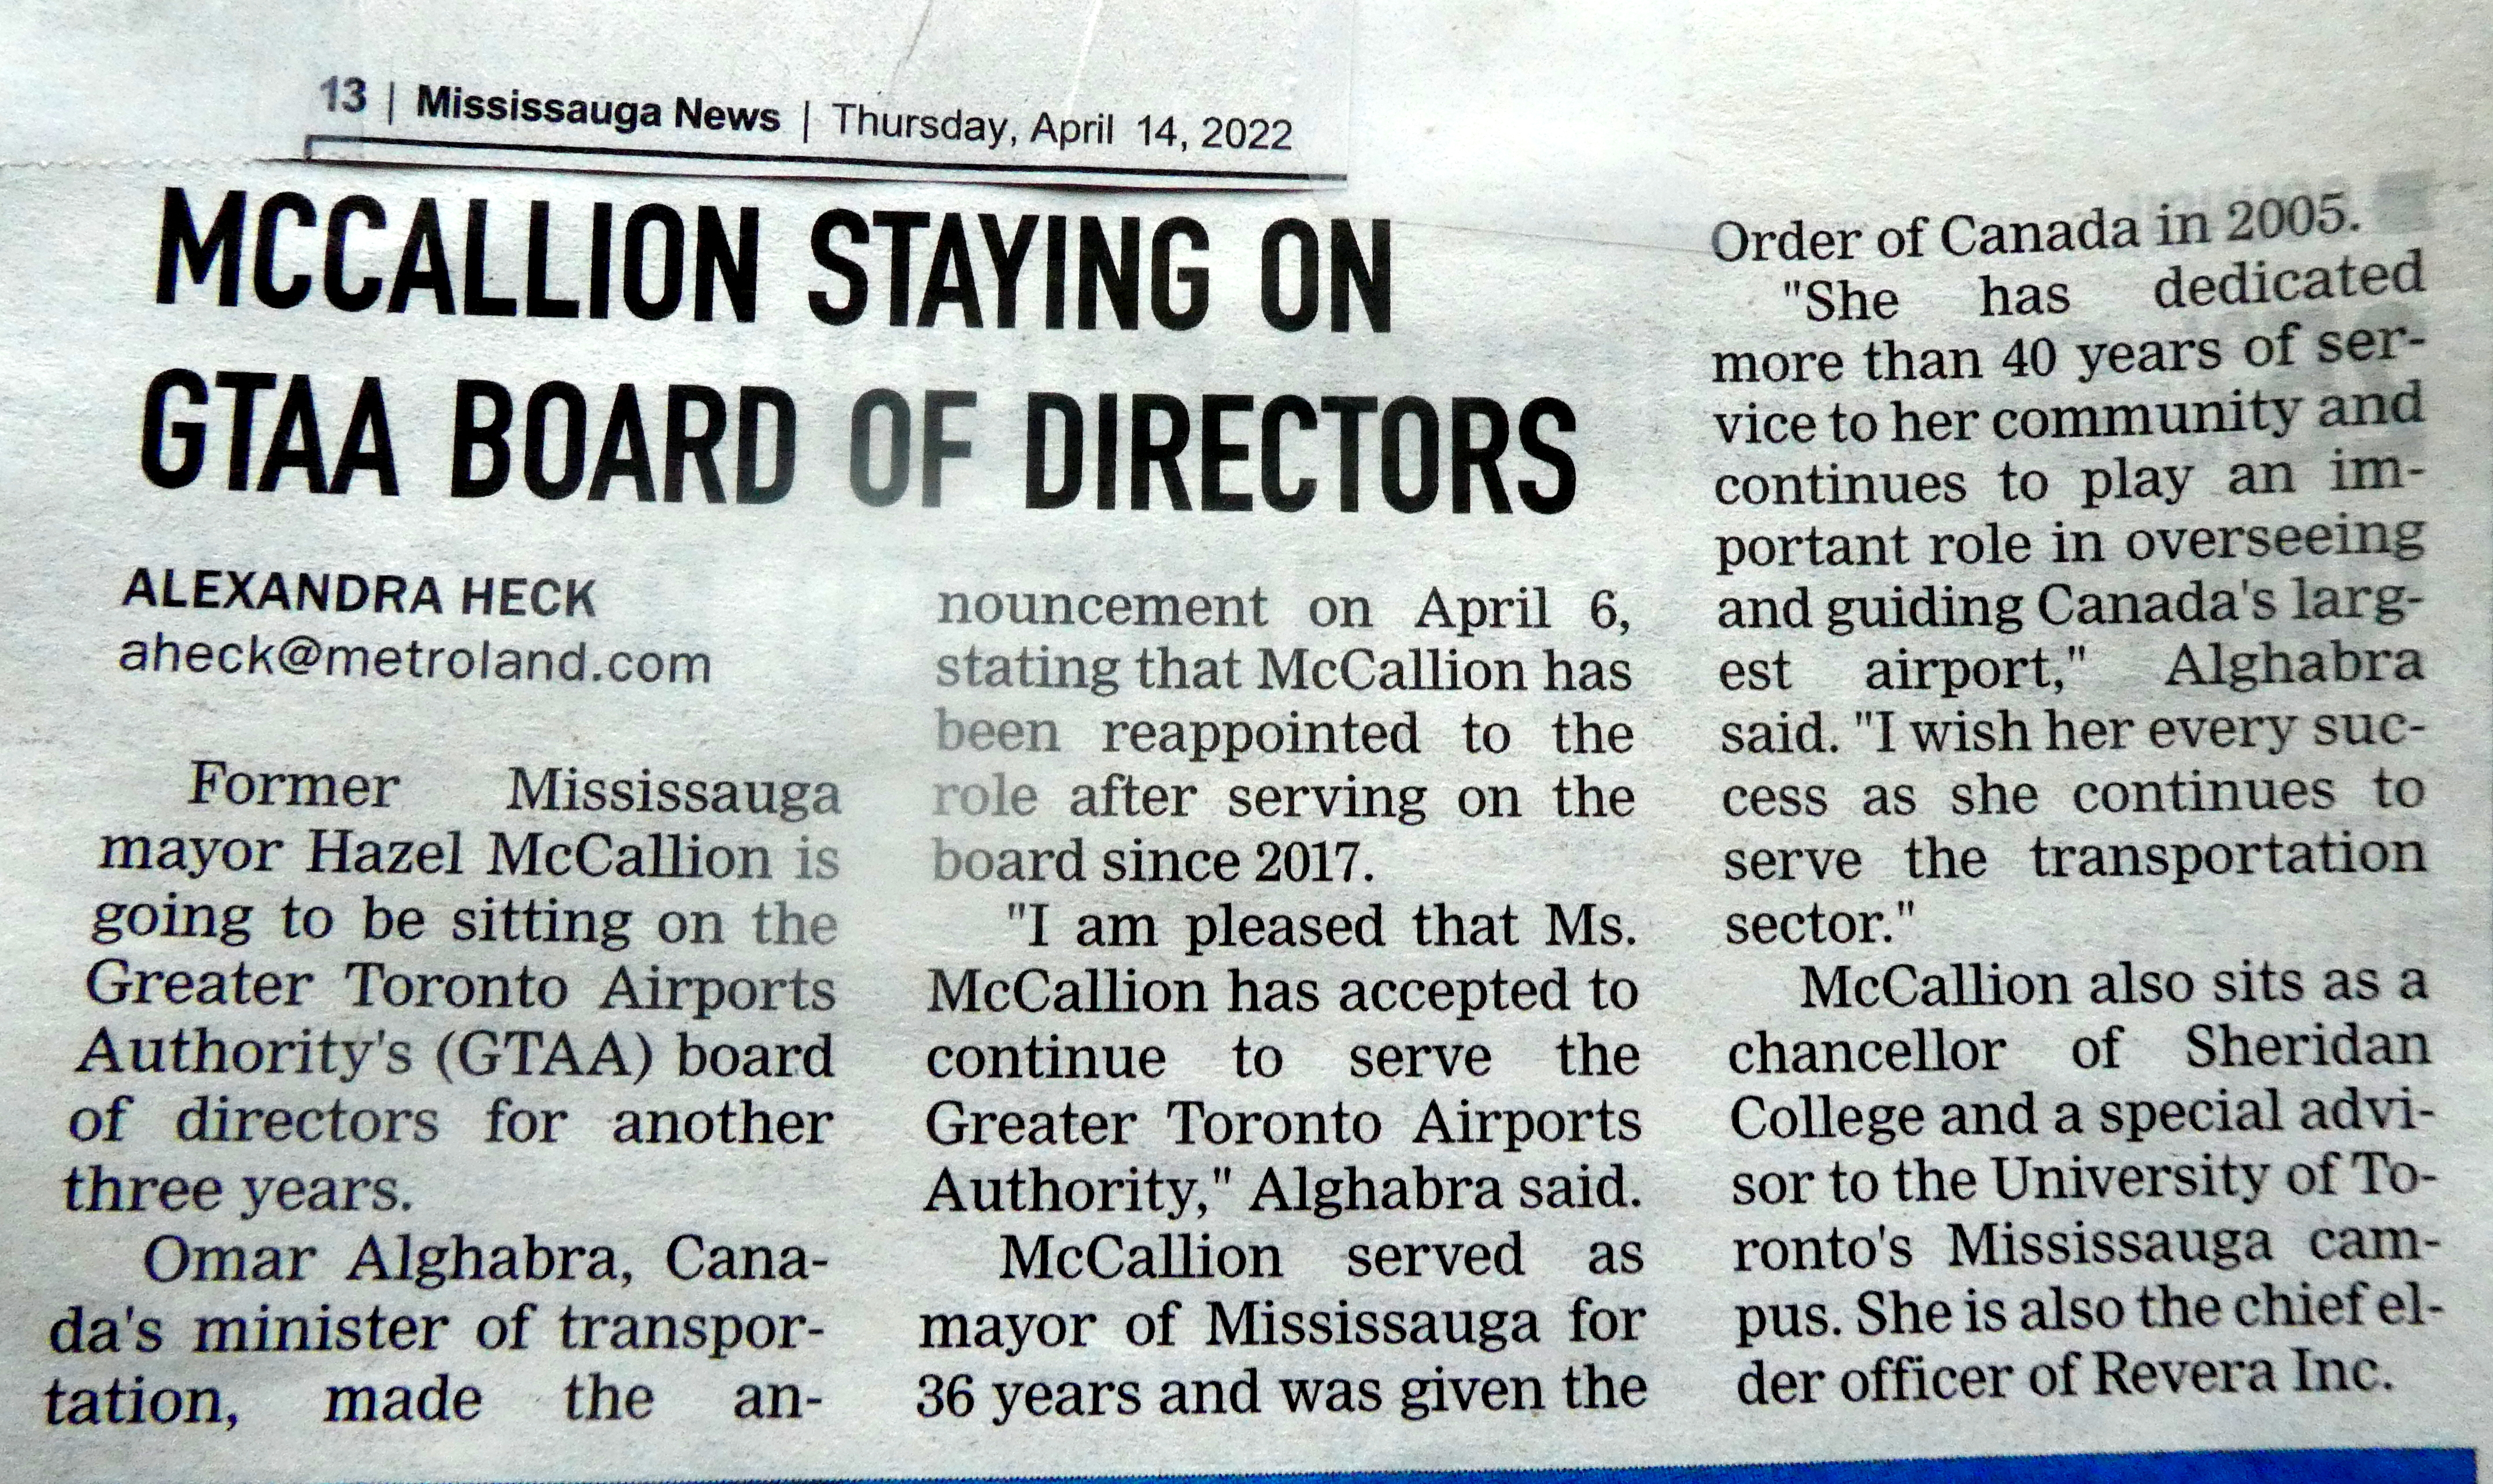 McCallion Staying On GTAA Board of Directors, Mississauga News Apr 14, 2022, p.13